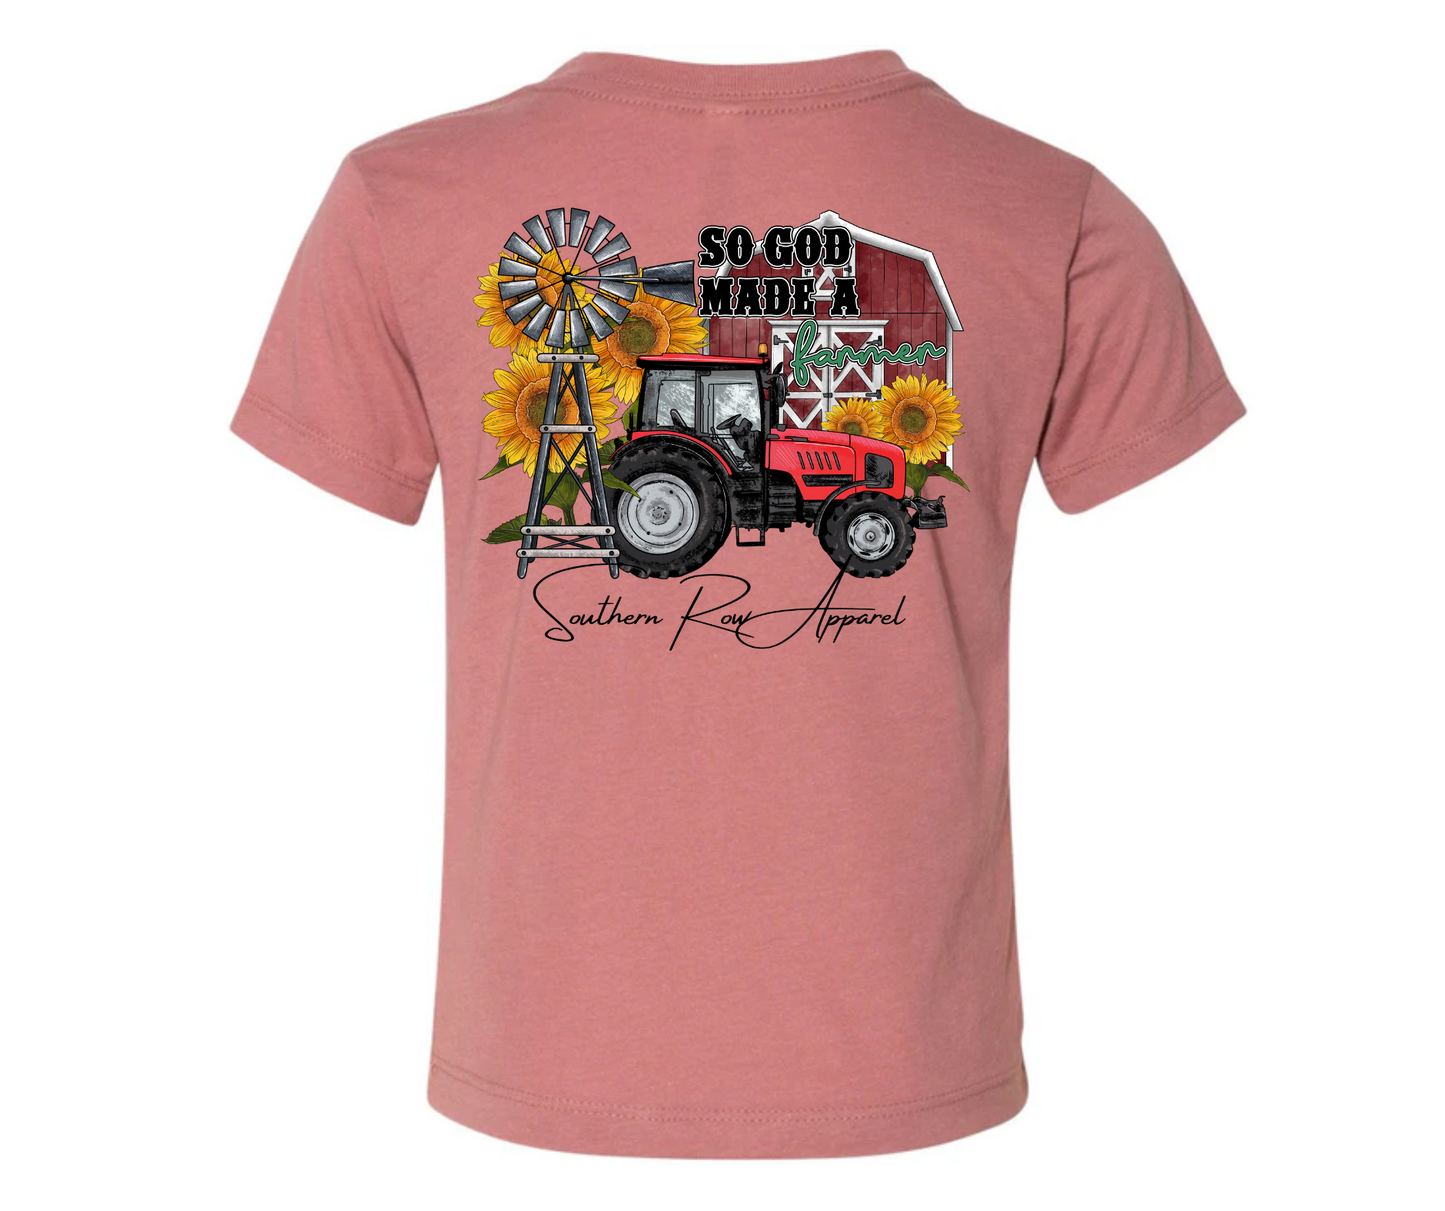 So God made a farmer. Featuring a red barn, red tractor, windmill and sunflowers